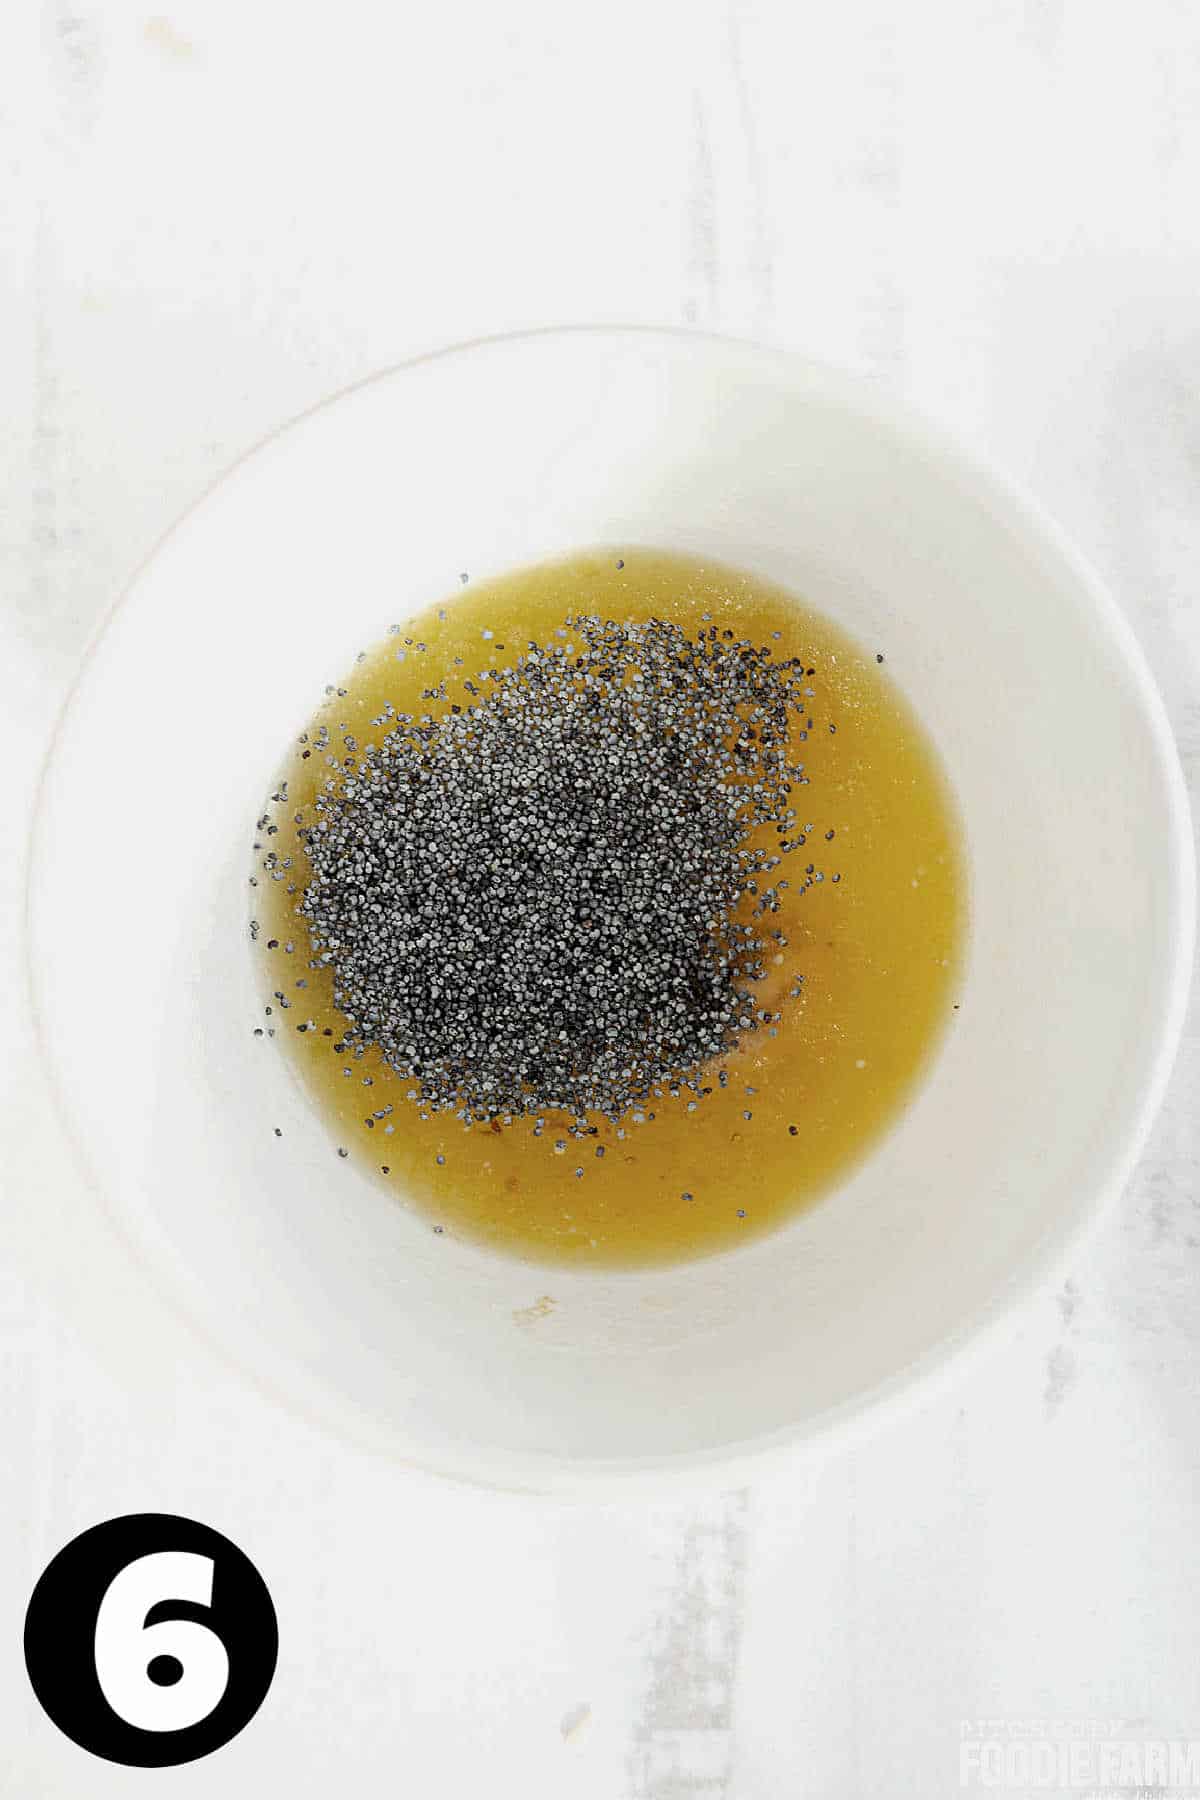 Melted butter, poppy seeds, and other spices in a white mixing bowl.